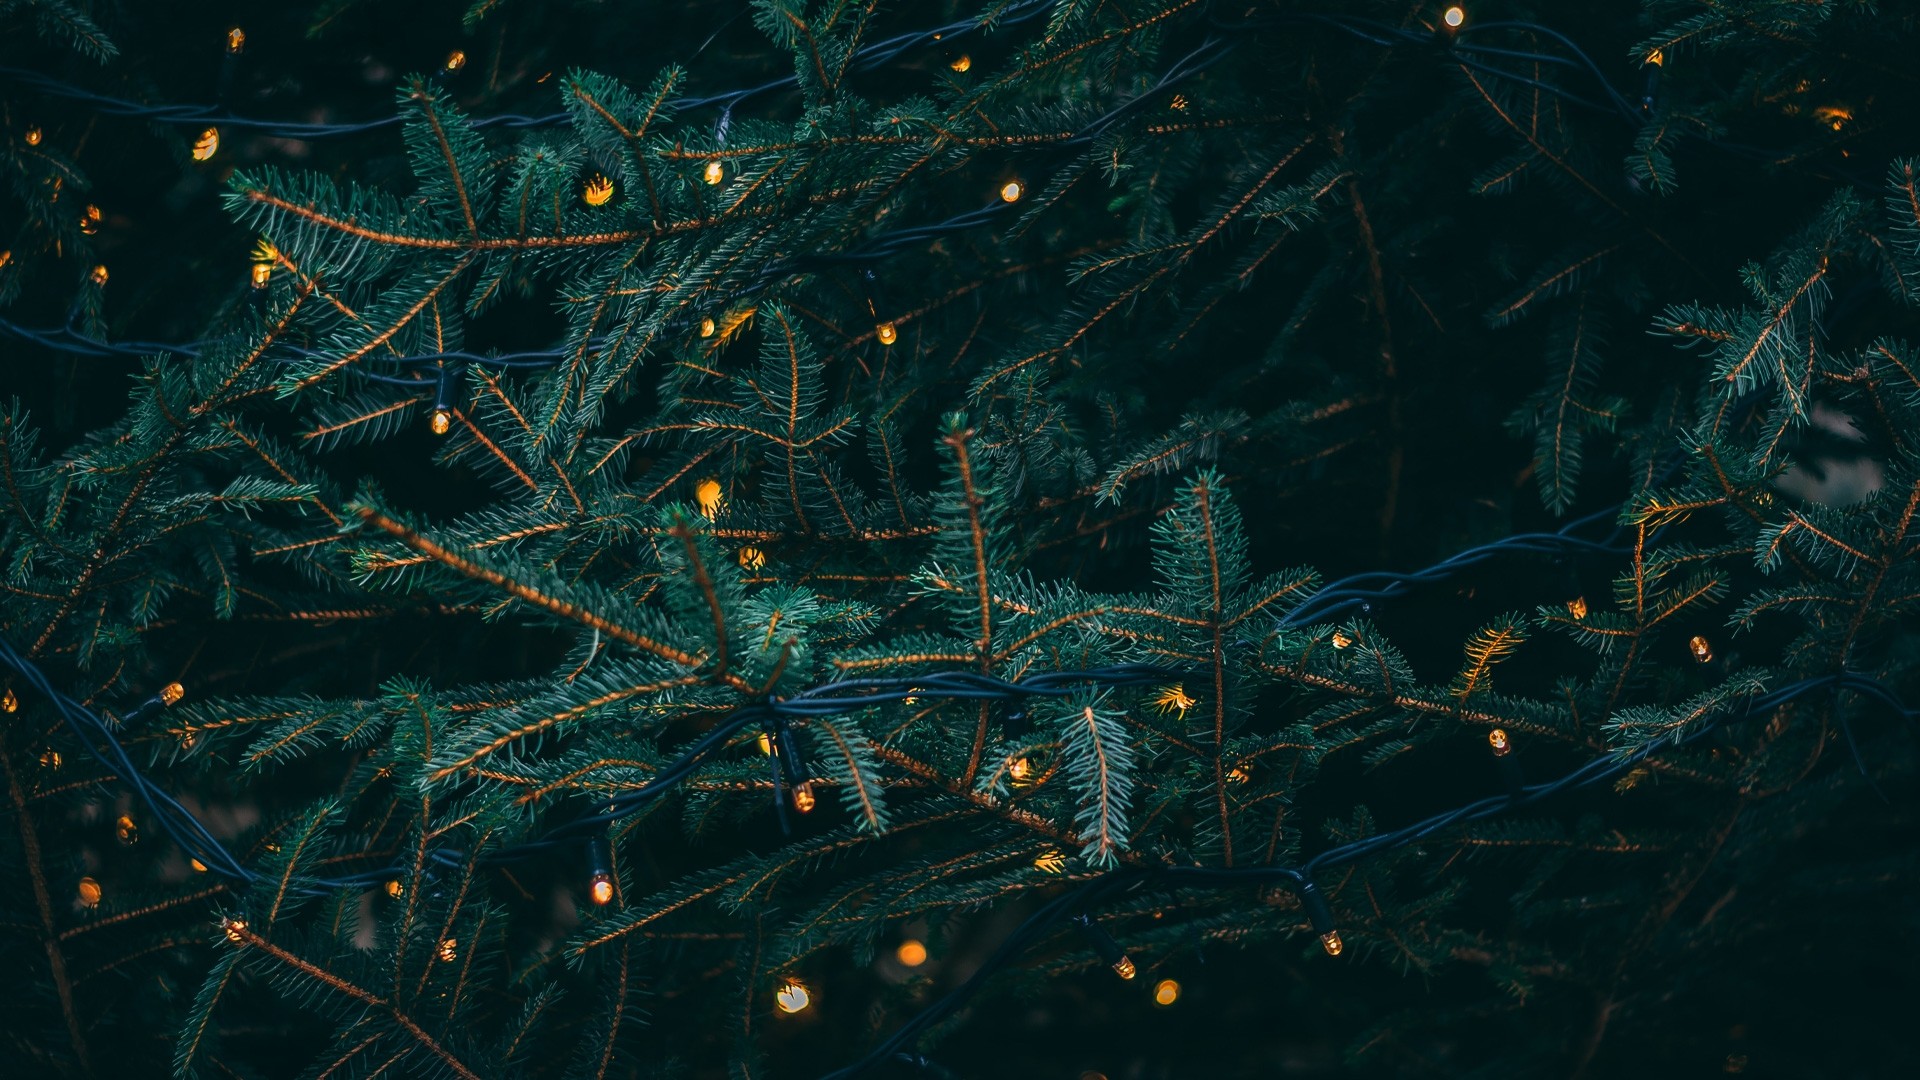 A close up of a pine tree with fairy lights wrapped around it - Computer